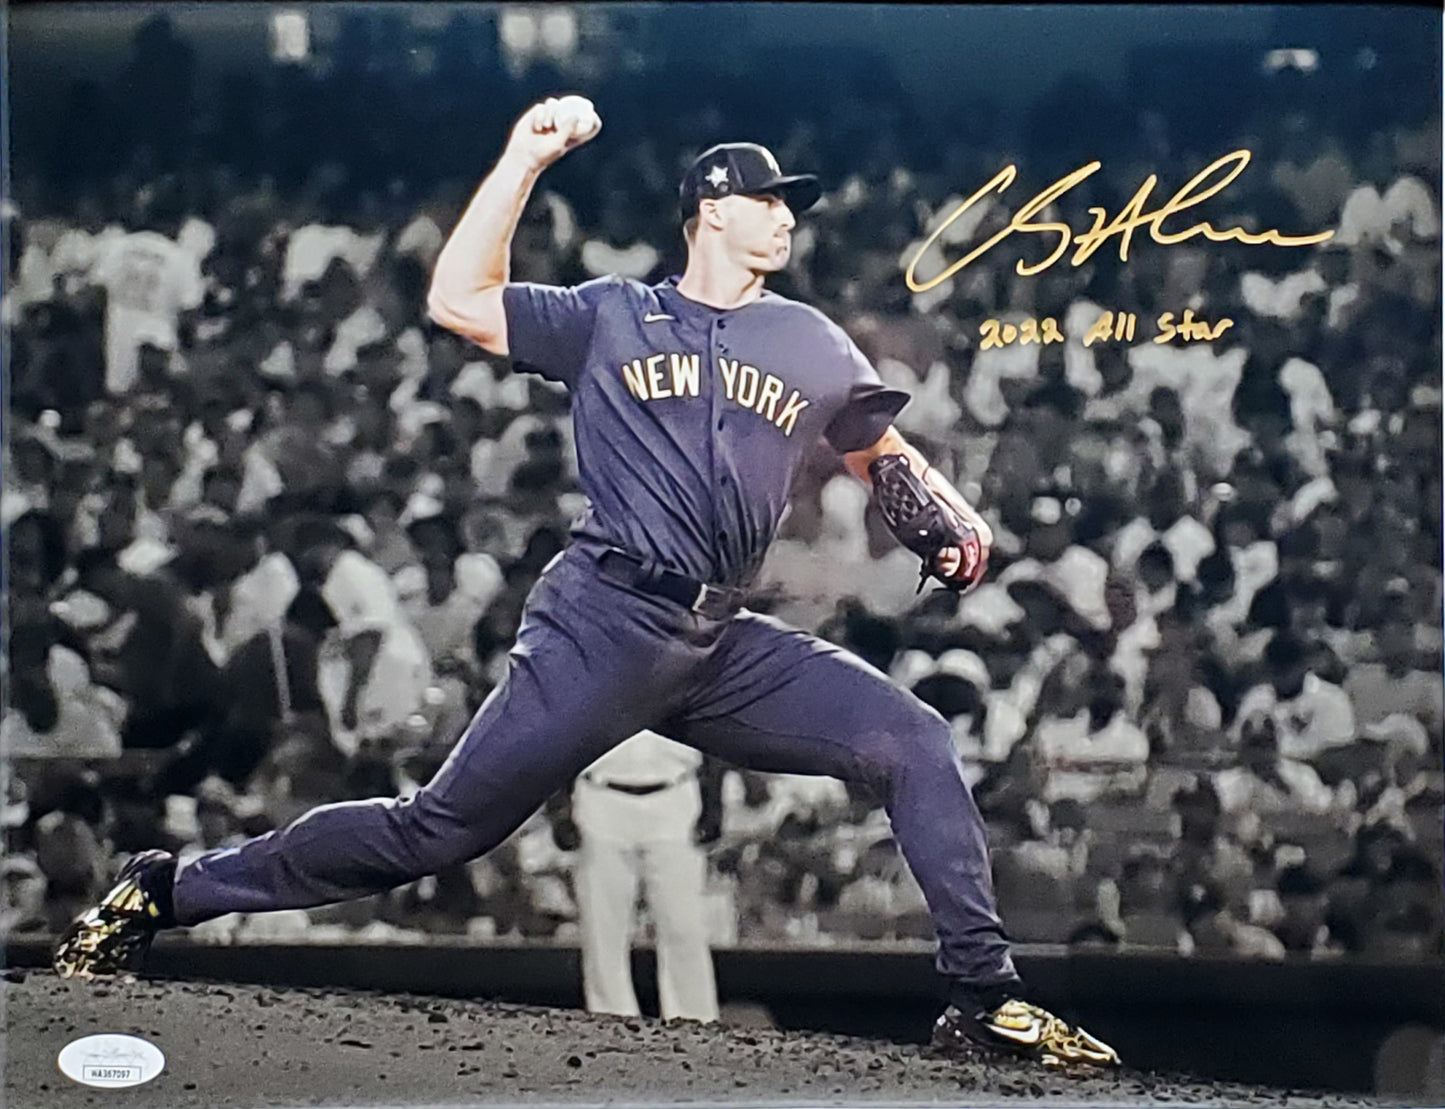 New York Yankees  Clay Holmes Autographed 11x14 Metallic Photo Picture with the inscription "2022 All Star"